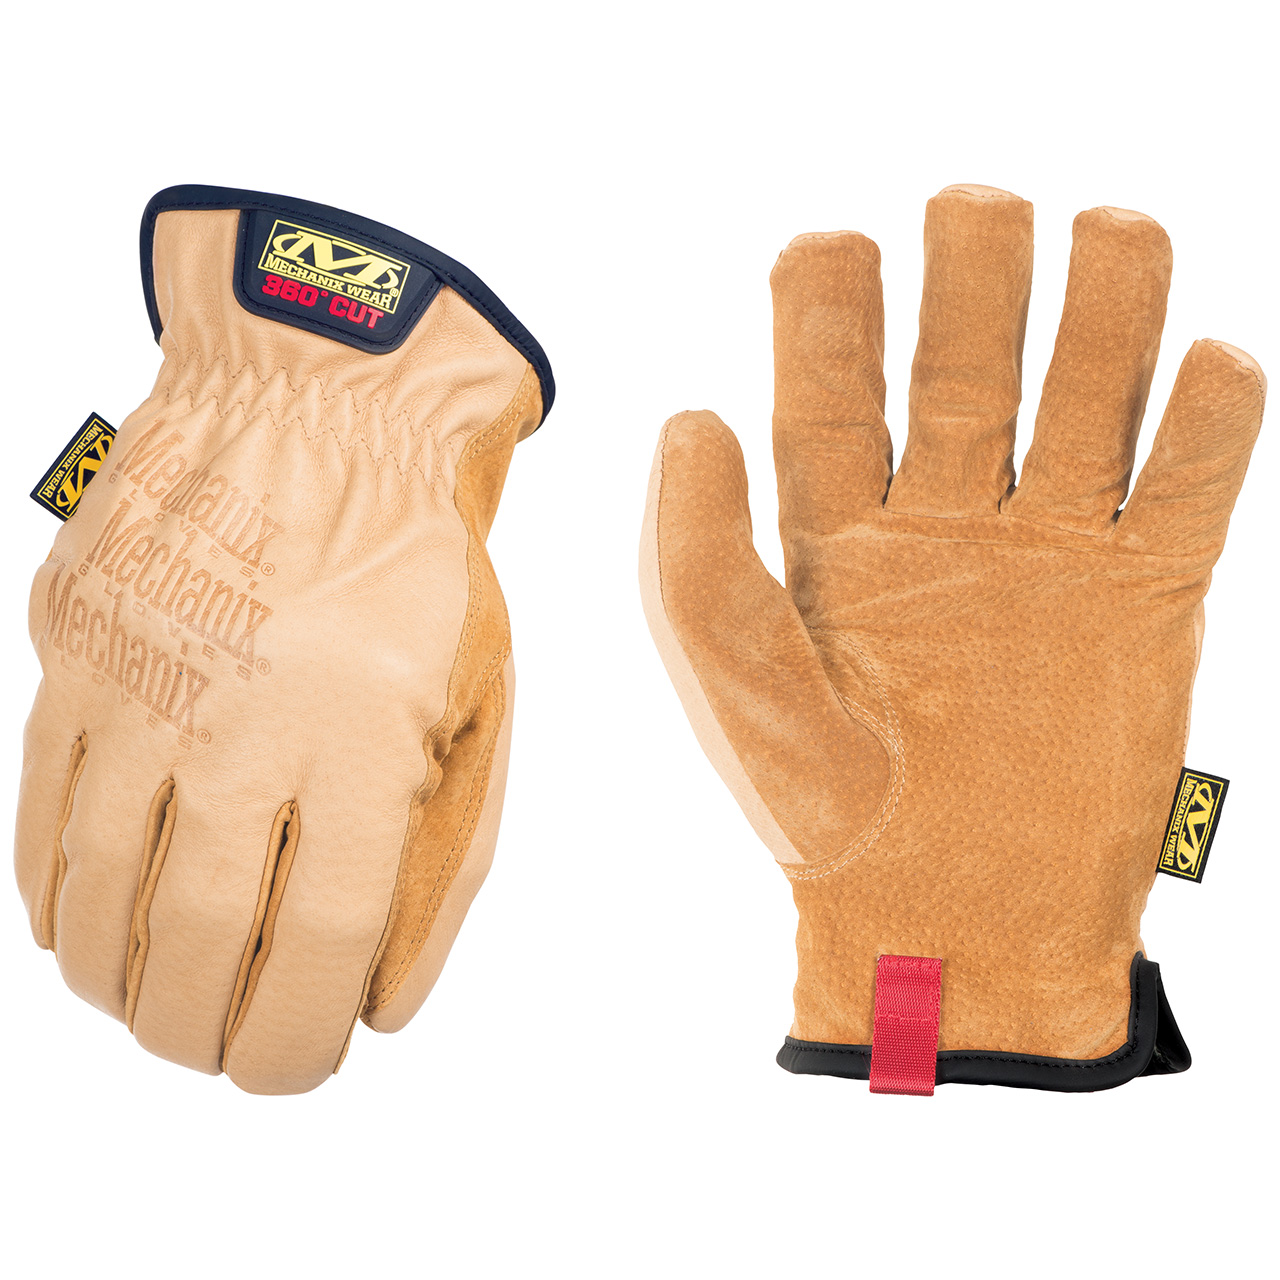 https://cdn11.bigcommerce.com/s-4s9liwcv/images/stencil/original/products/386506/488501/LD-C75-mechanix-wear-Durahide-Driver-F9-360-Cut-Resistant-Leather-Gloves-pic1__15877.1613773703.jpg?c=2&imbypass=on&imbypass=on